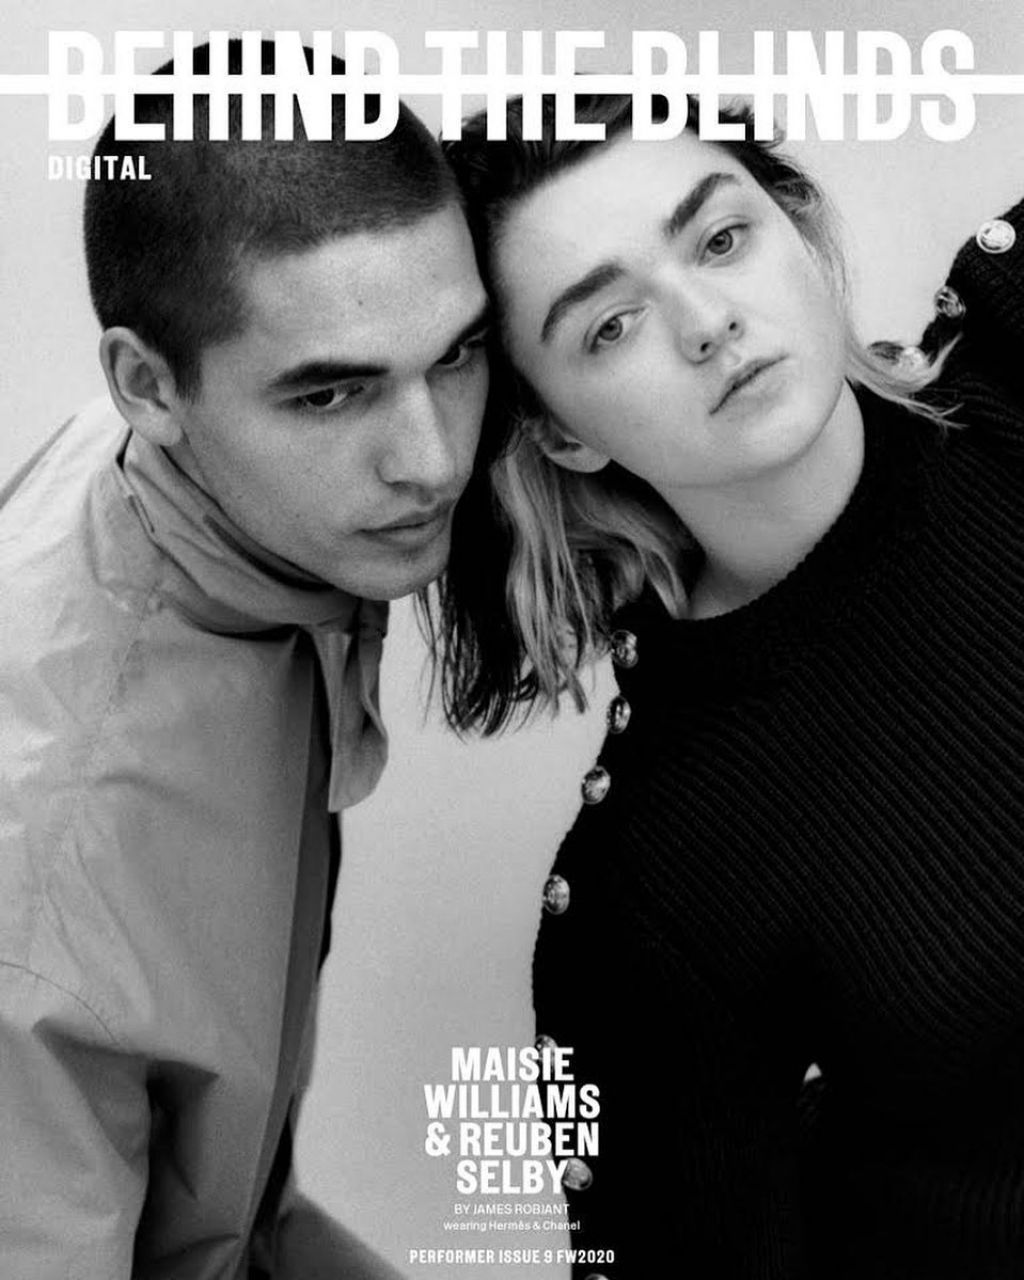 maisie-williams-behind-the-blinds-issue-9-fall-winter-2020-1-0.jpg